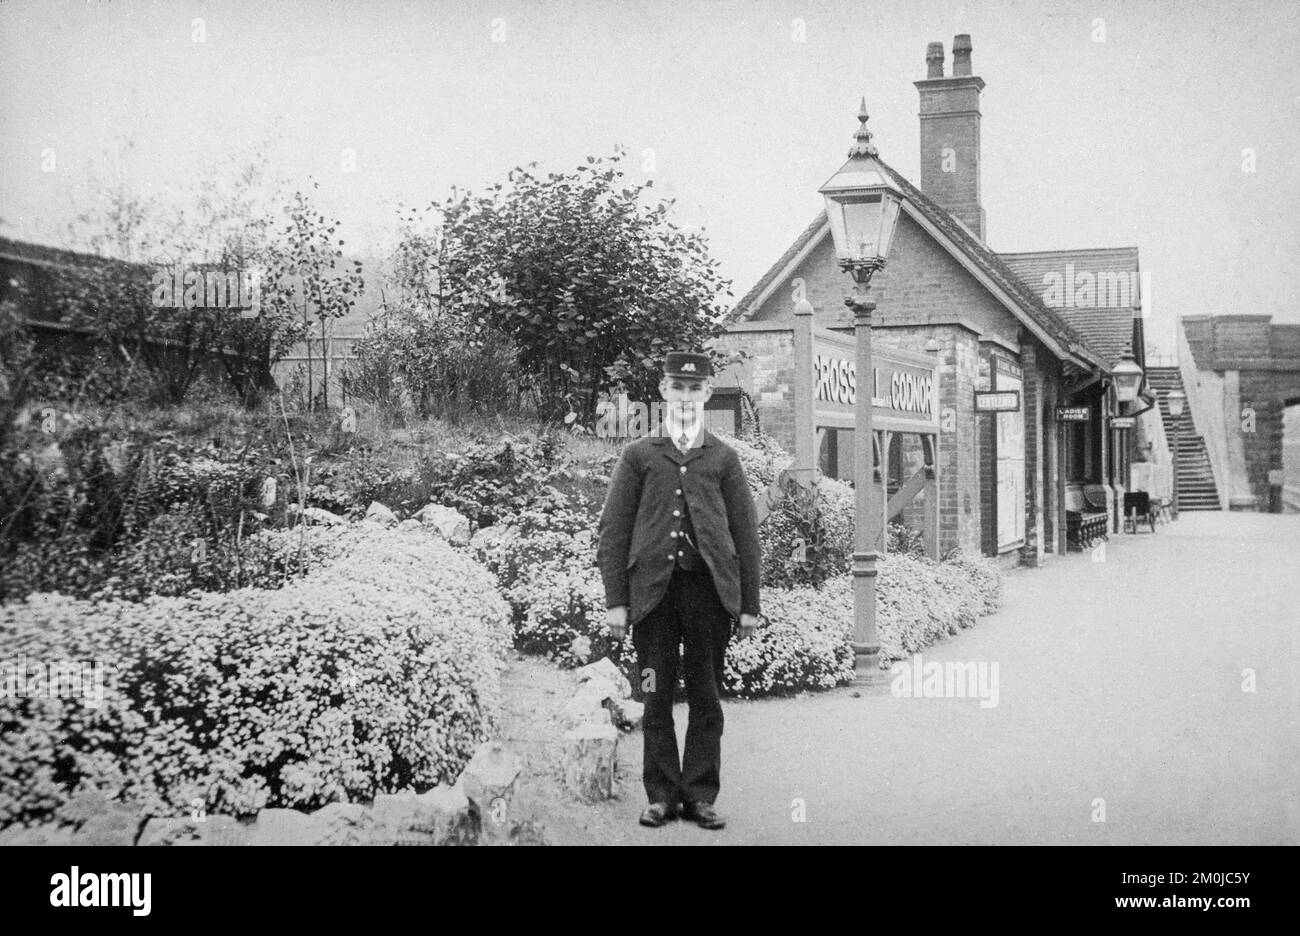 Early 20th Century photograph showing Crosshill and Codnor Railway Station in Derbyshire, England. The Station Master Harry Freeman in the foreground. Stock Photo